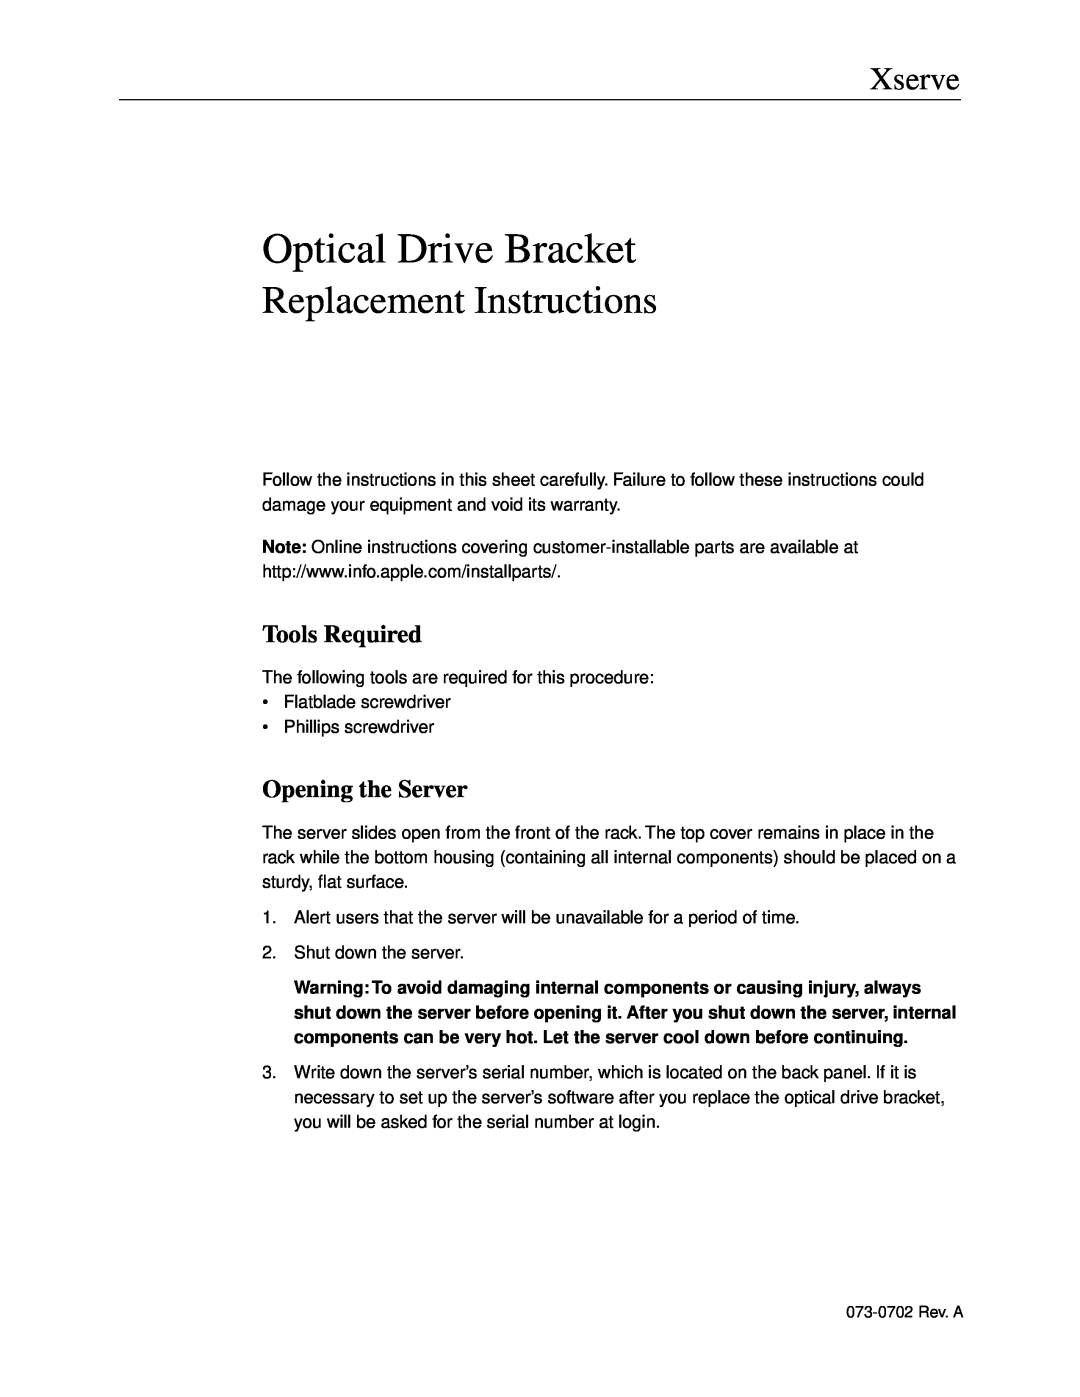 Apple Optical Drive Bracket warranty Tools Required, Opening the Server, Replacement Instructions, Xserve 